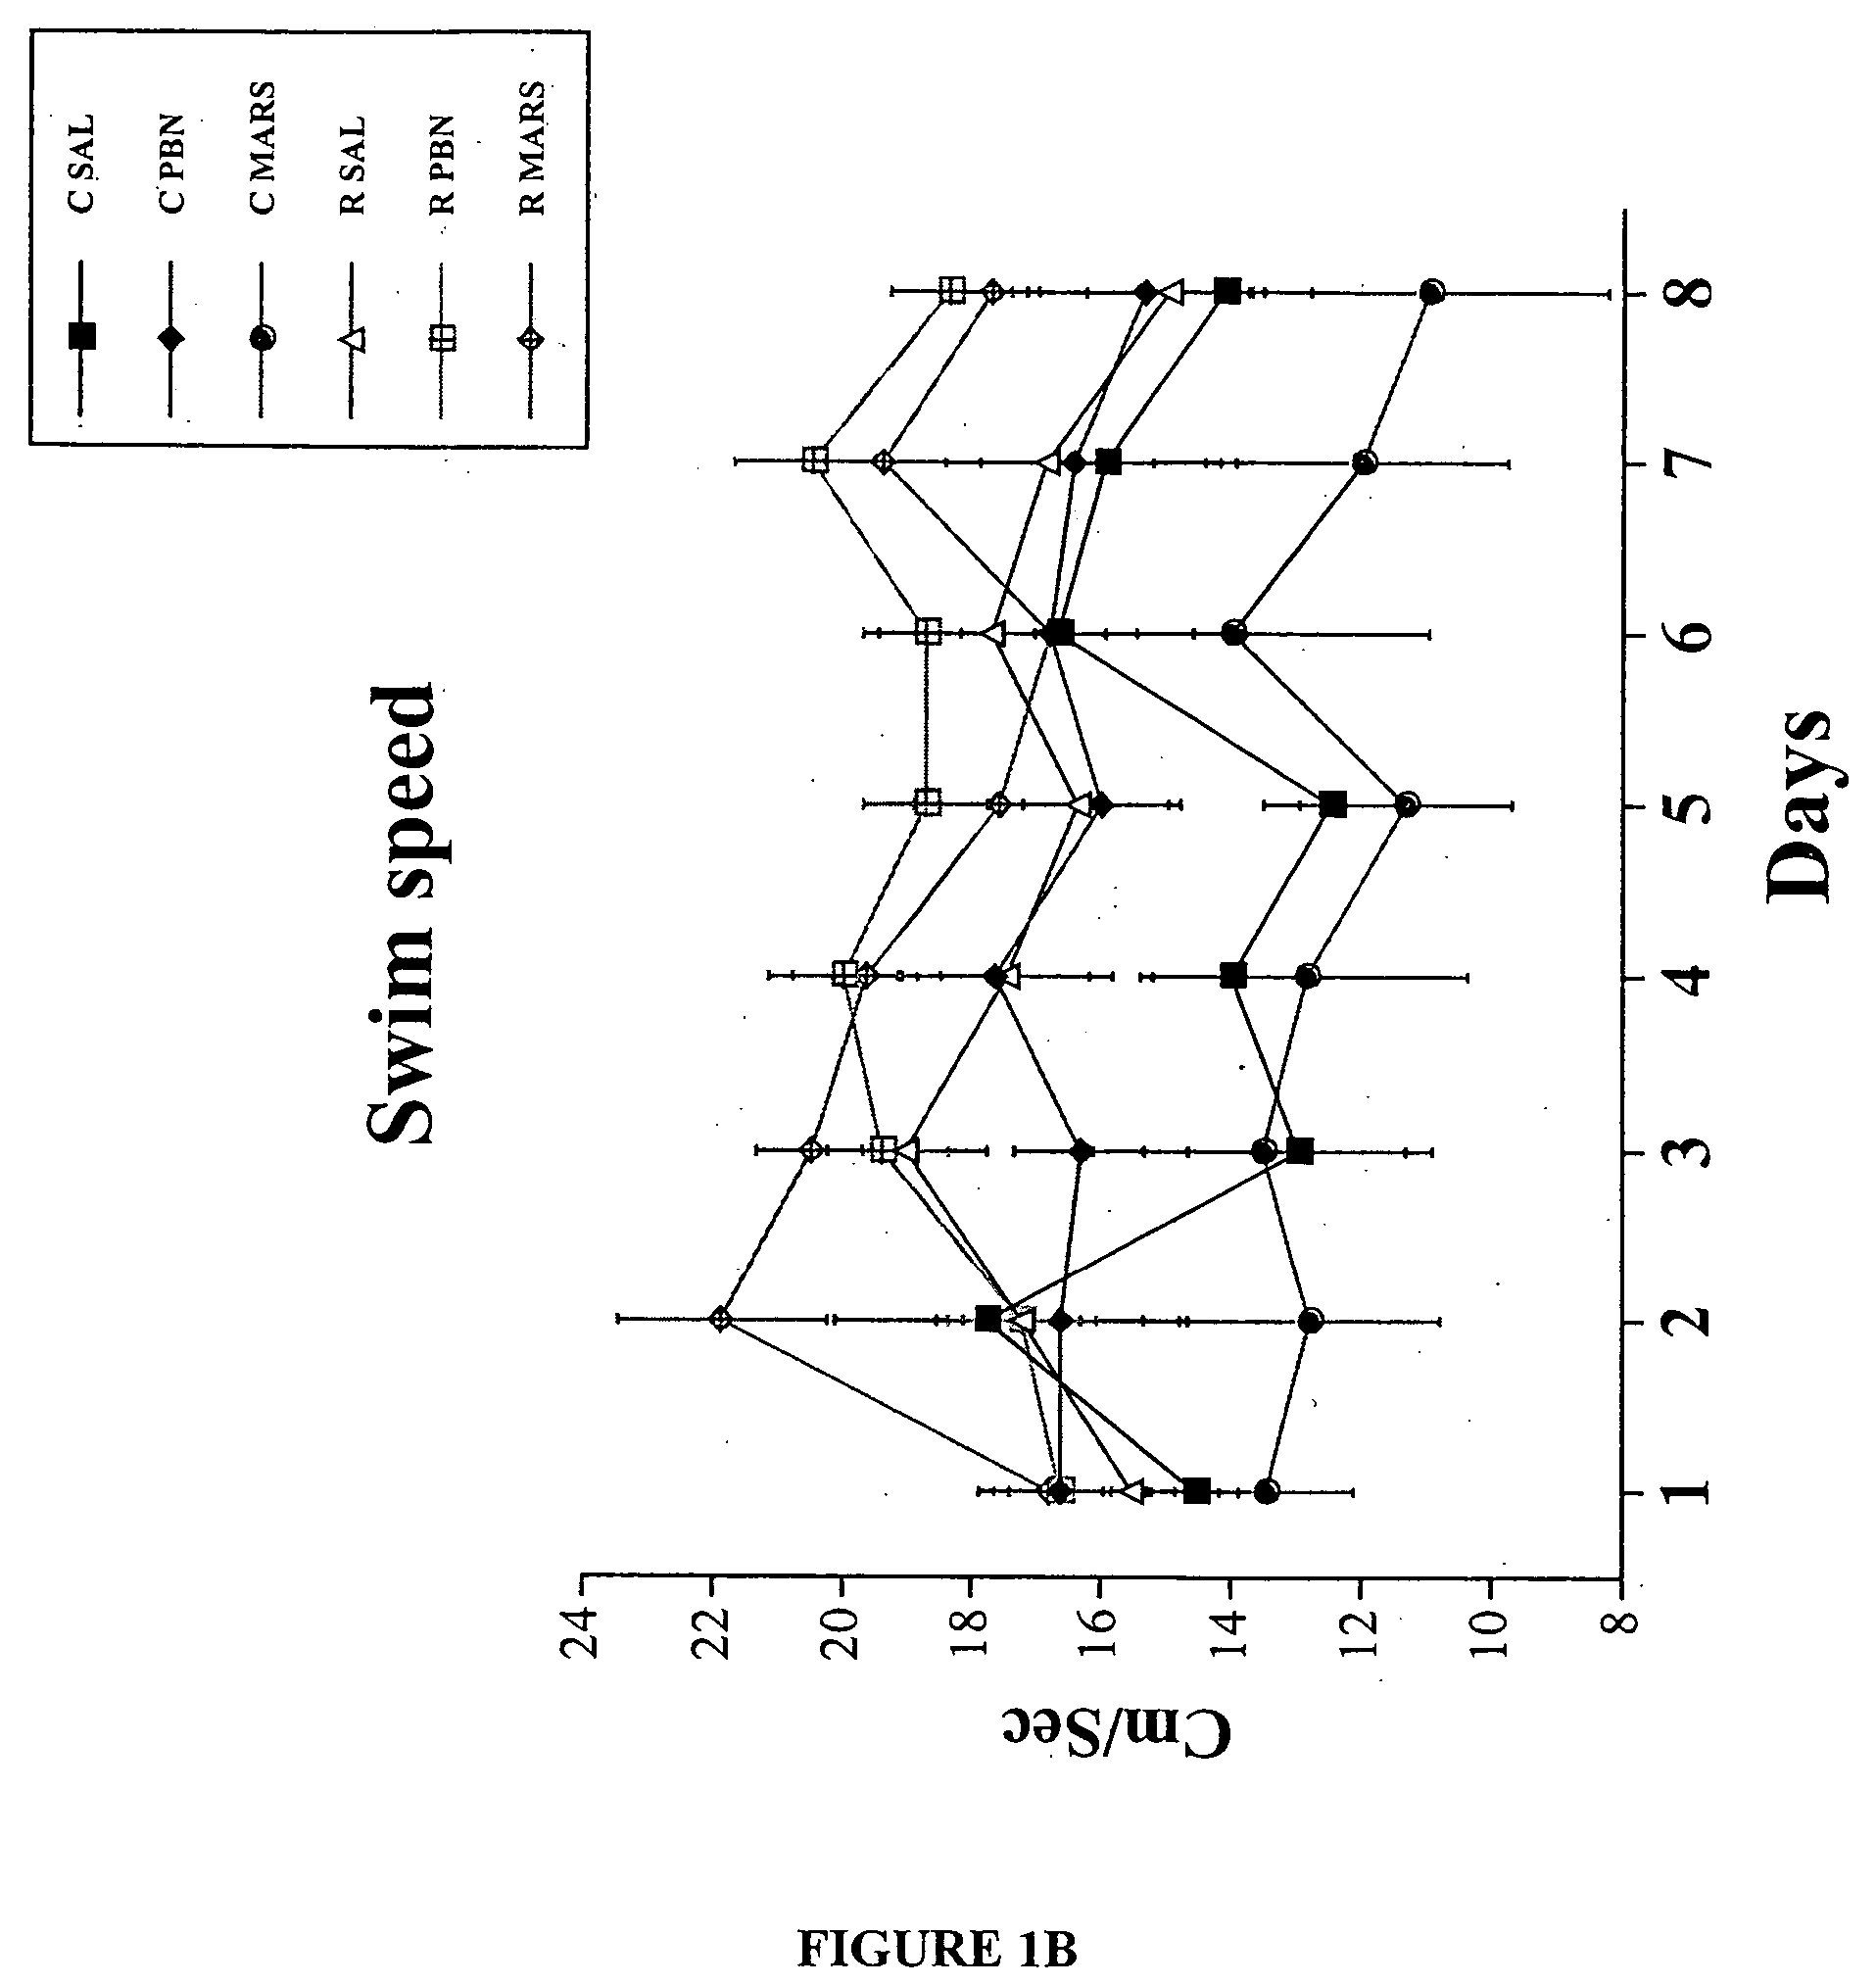 Method for increasing cognitive function and neurogenesis